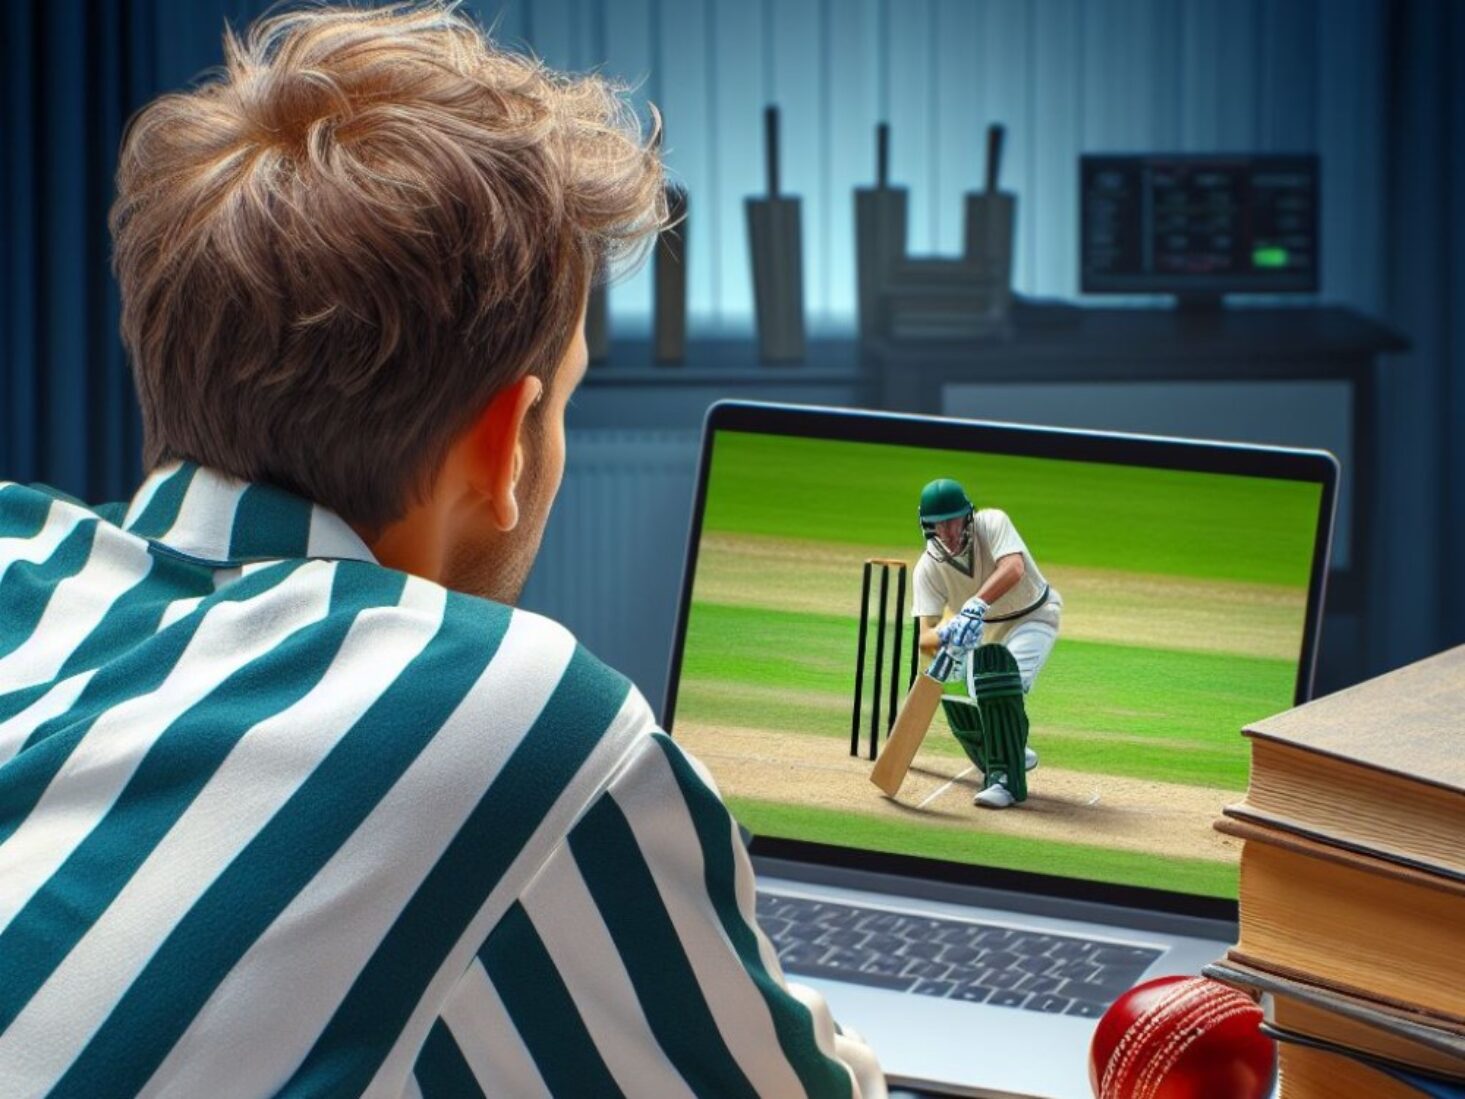 How to Improve Your Game By Watching Cricket